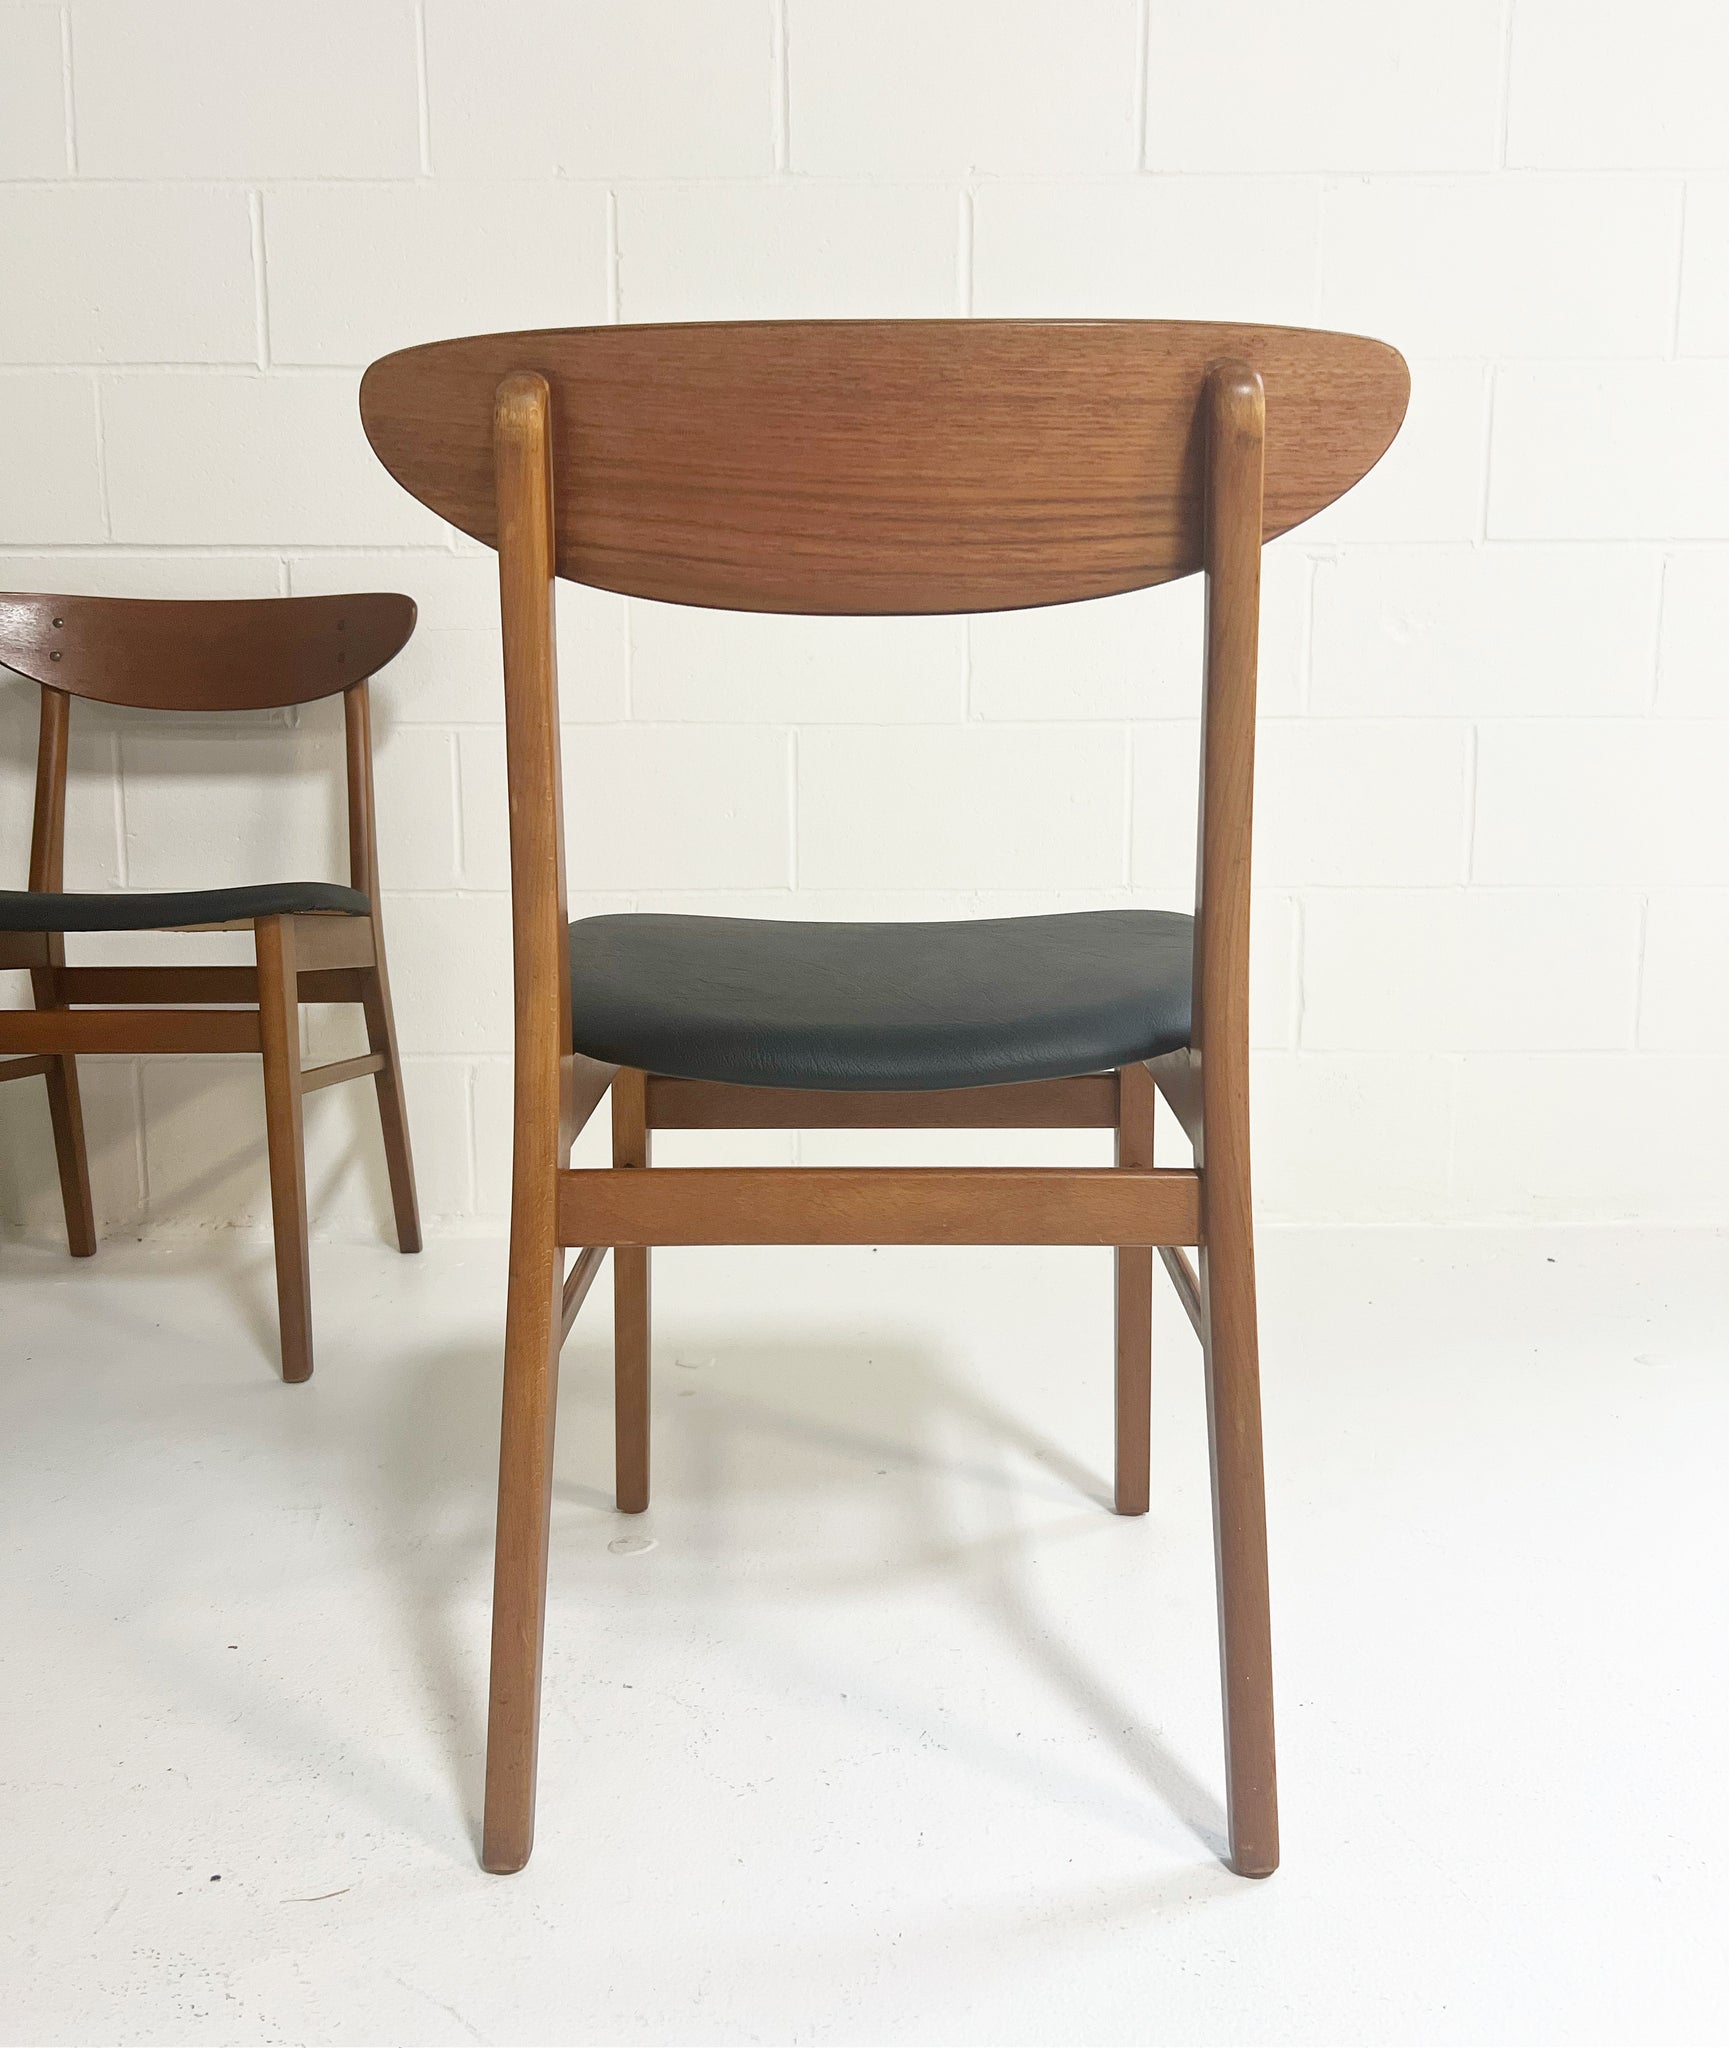 Model 210 Dining Chair, 8 Available